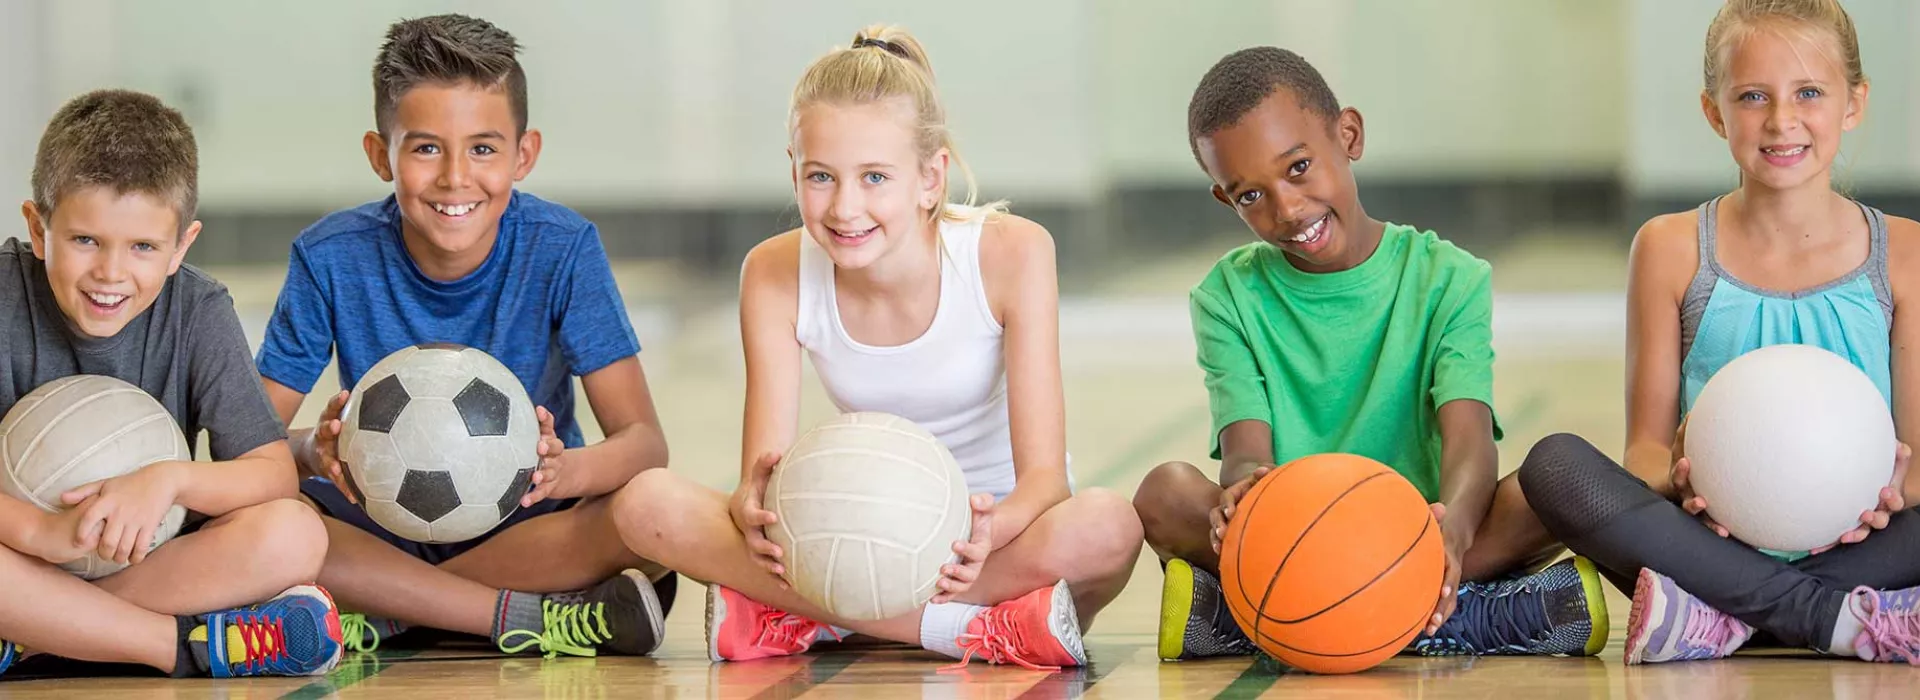 basketball classes near me for 5 year olds